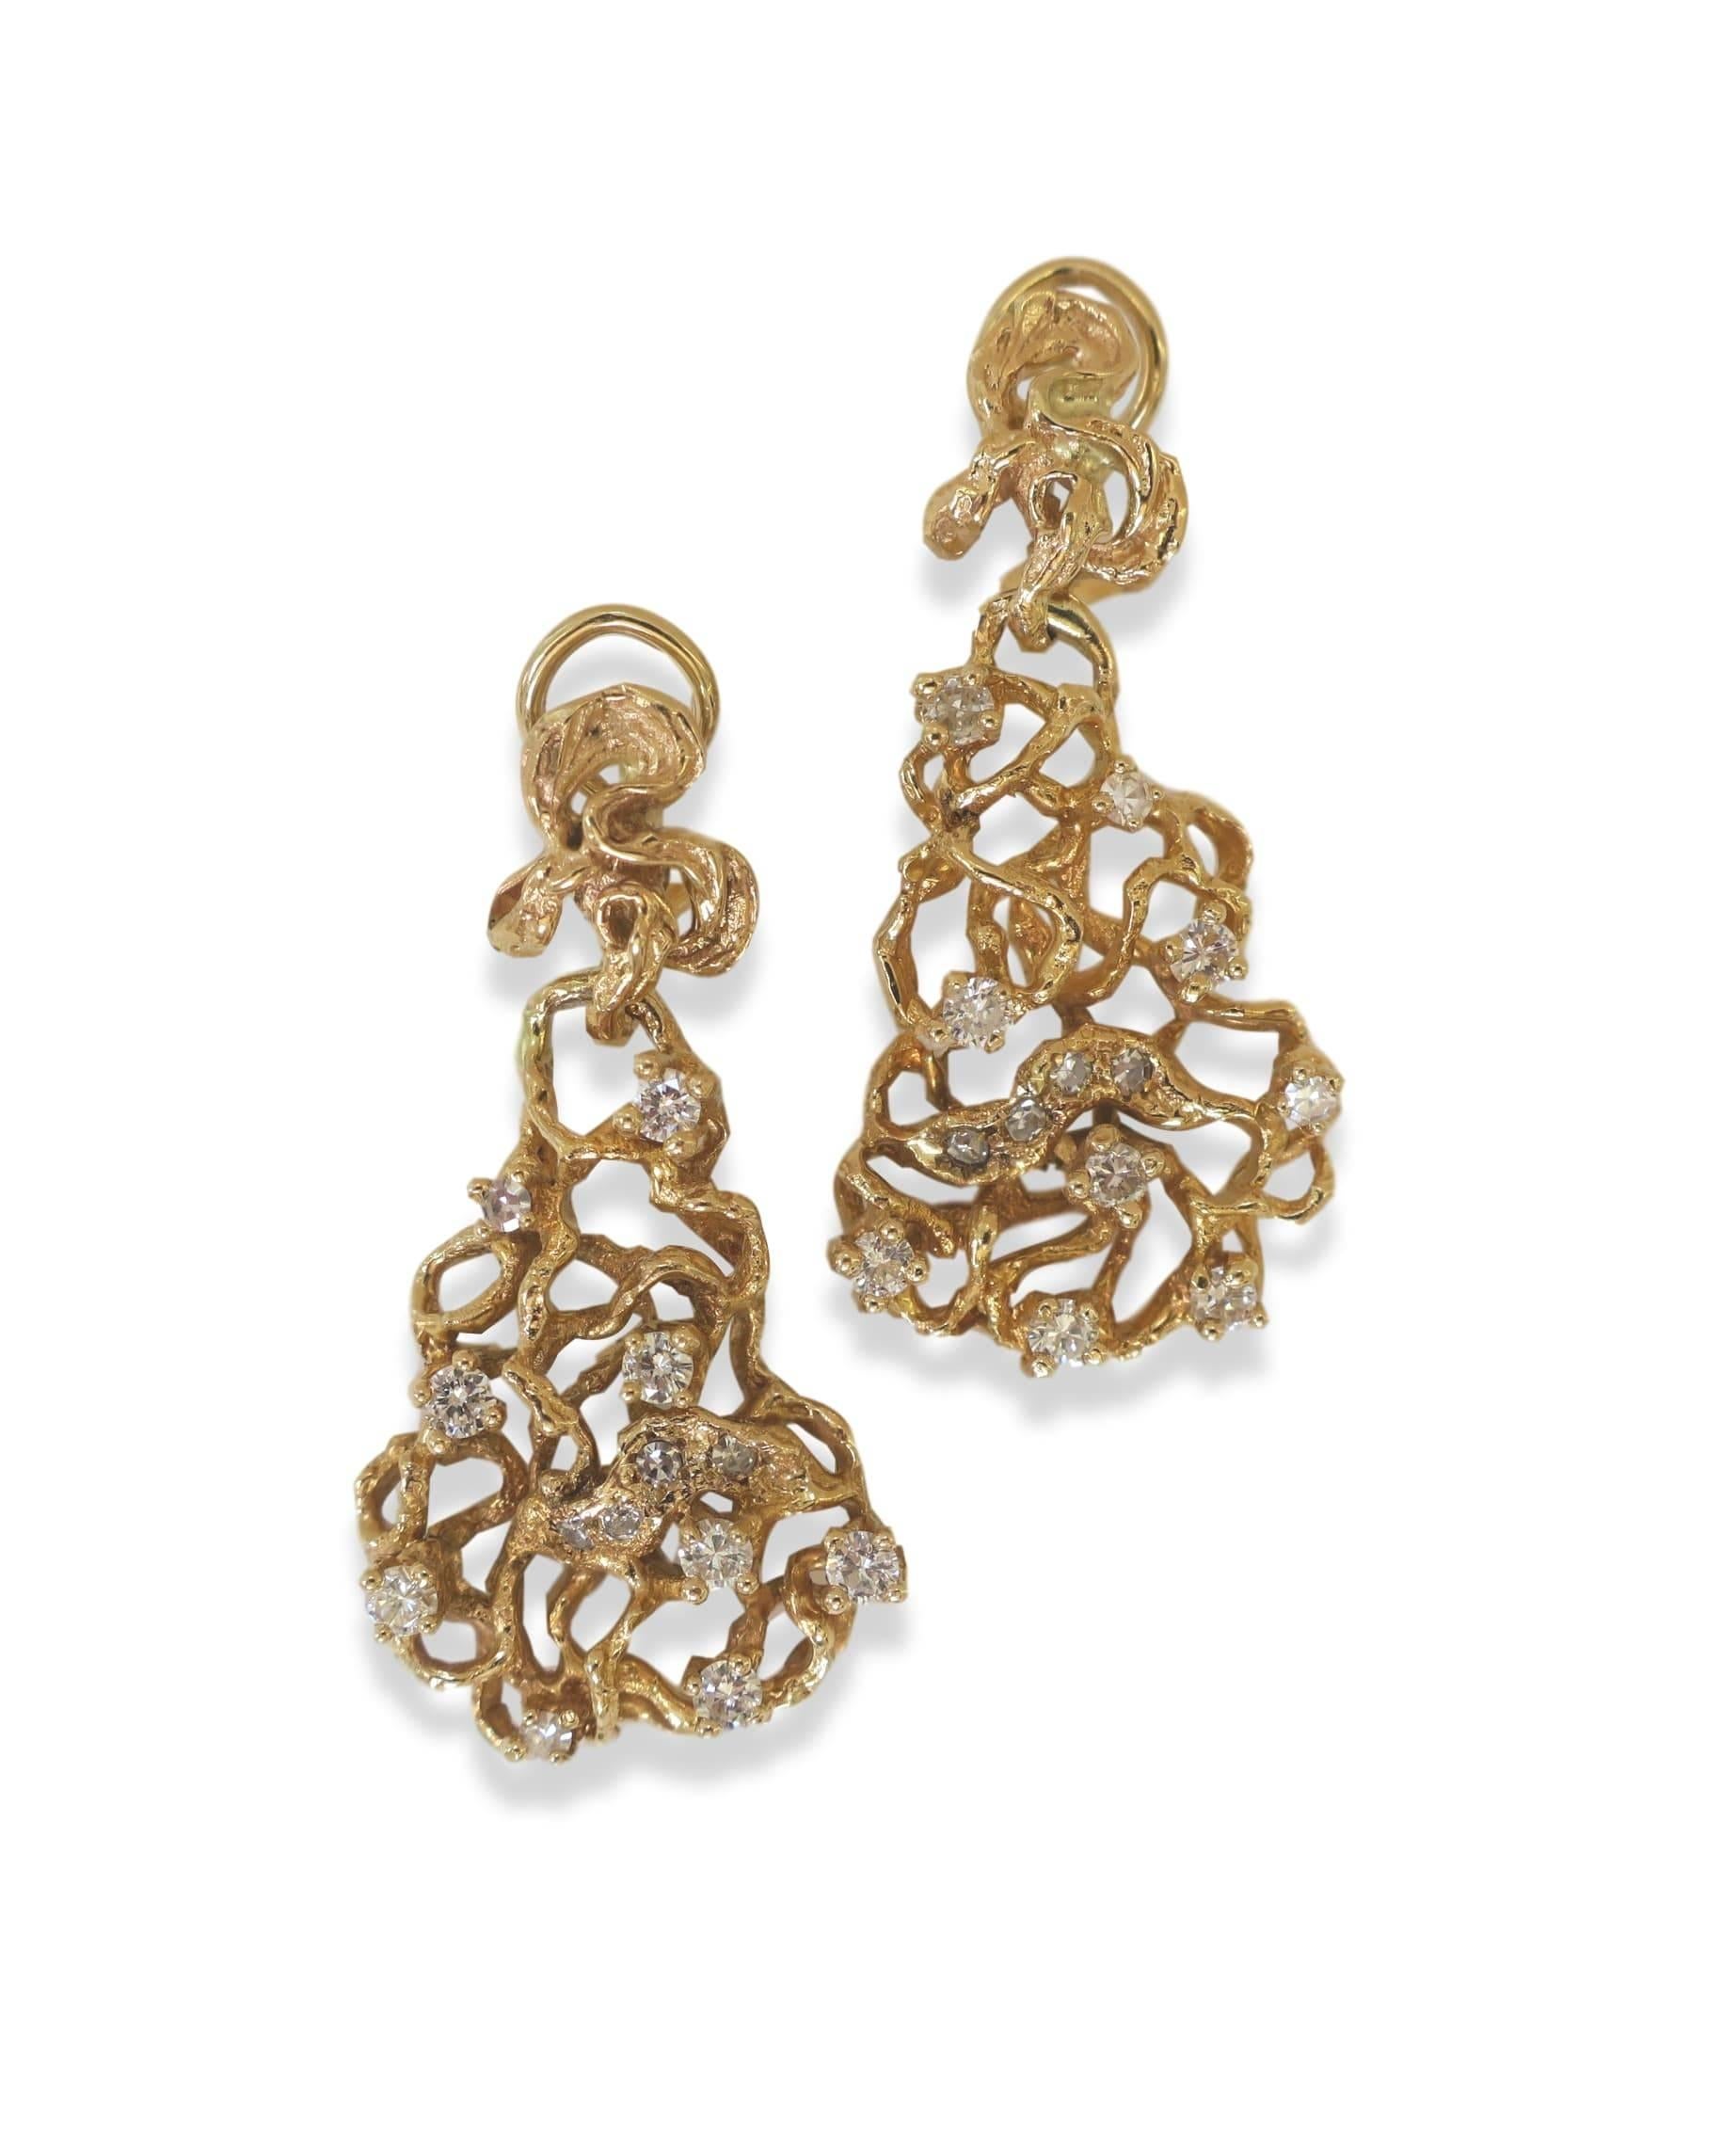 Modernist gold and diamond earrings in the style of Arthur King. The textured finish 14k, 1 3/4